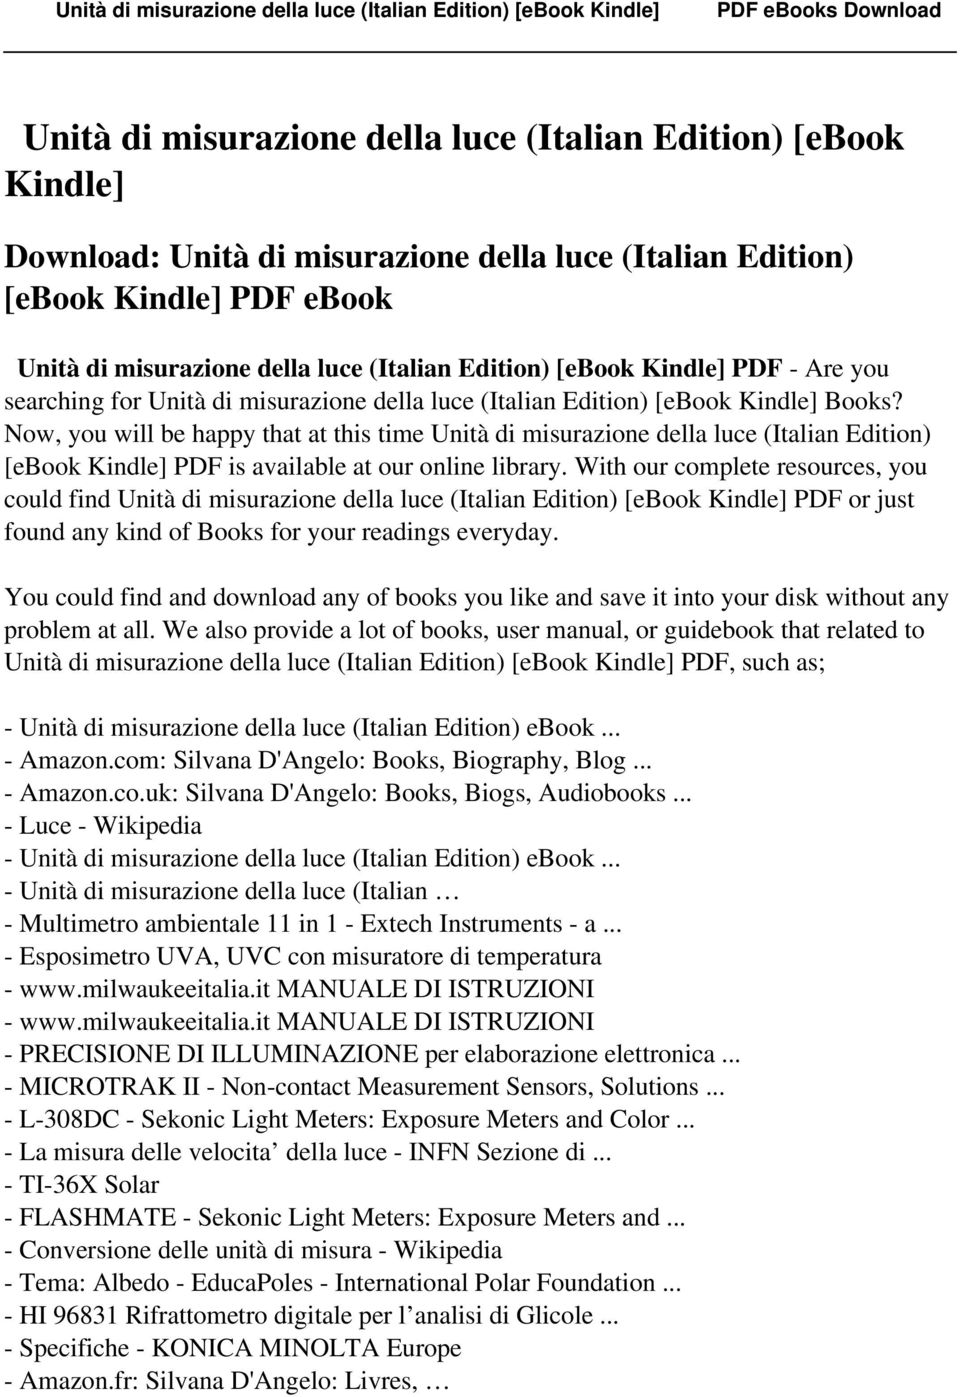 Now, you will be happy that at this time Unità di misurazione della luce (Italian Edition) [ebook Kindle] PDF is available at our online library.